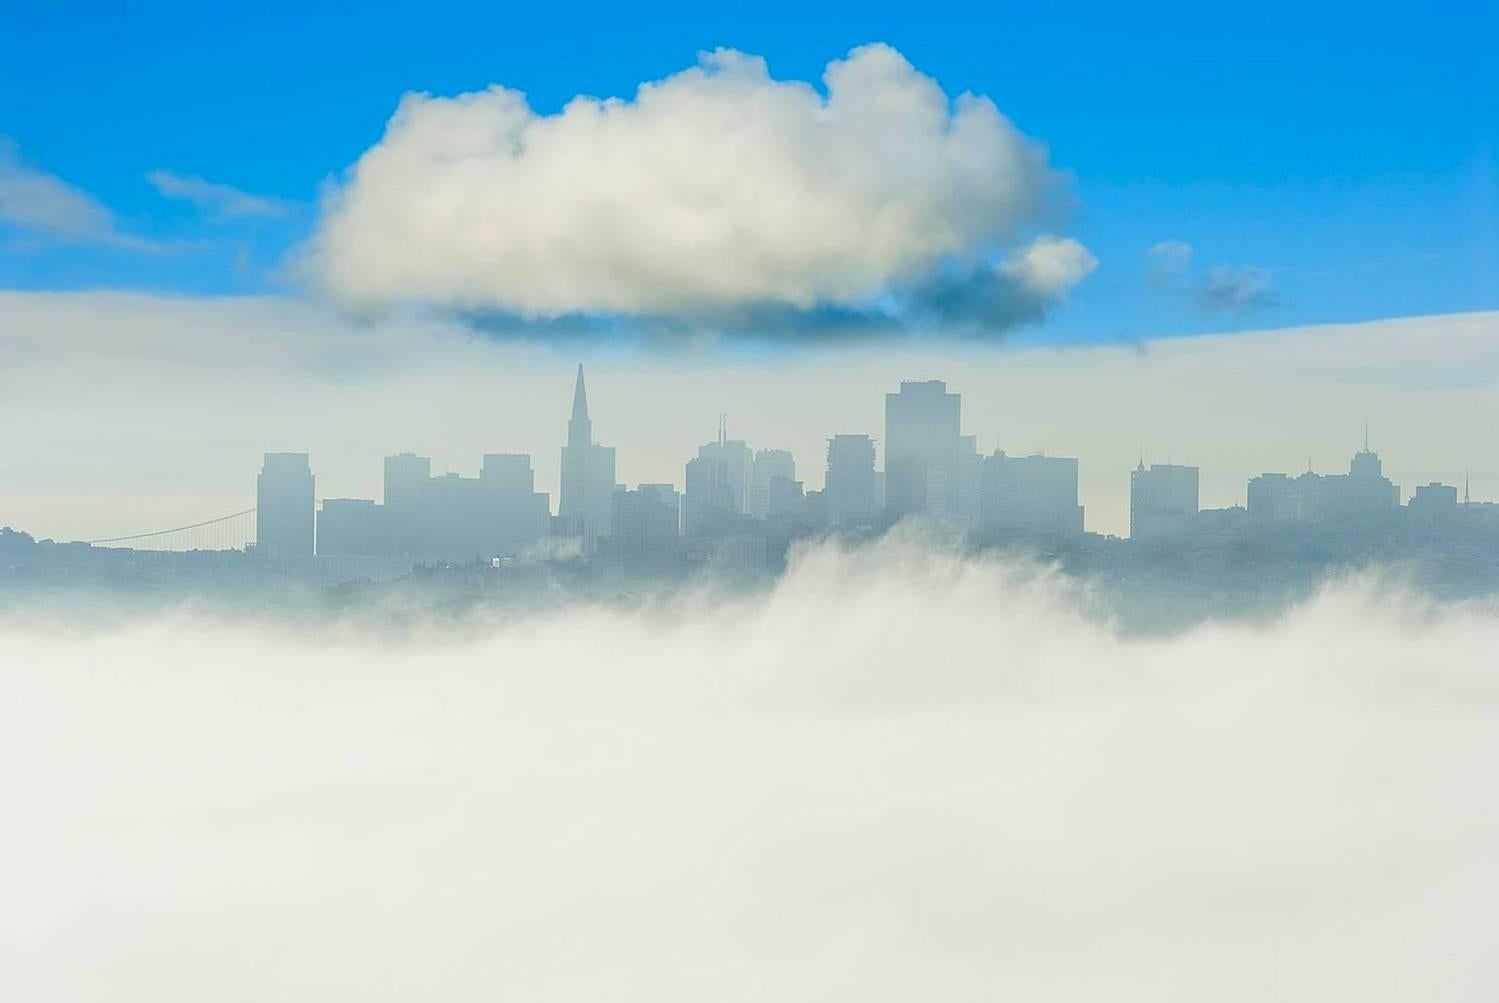 Mitchell Funk Color Photograph - San Francisco Skyline Blue Sky and One Big Cloud,  Landscape Photography